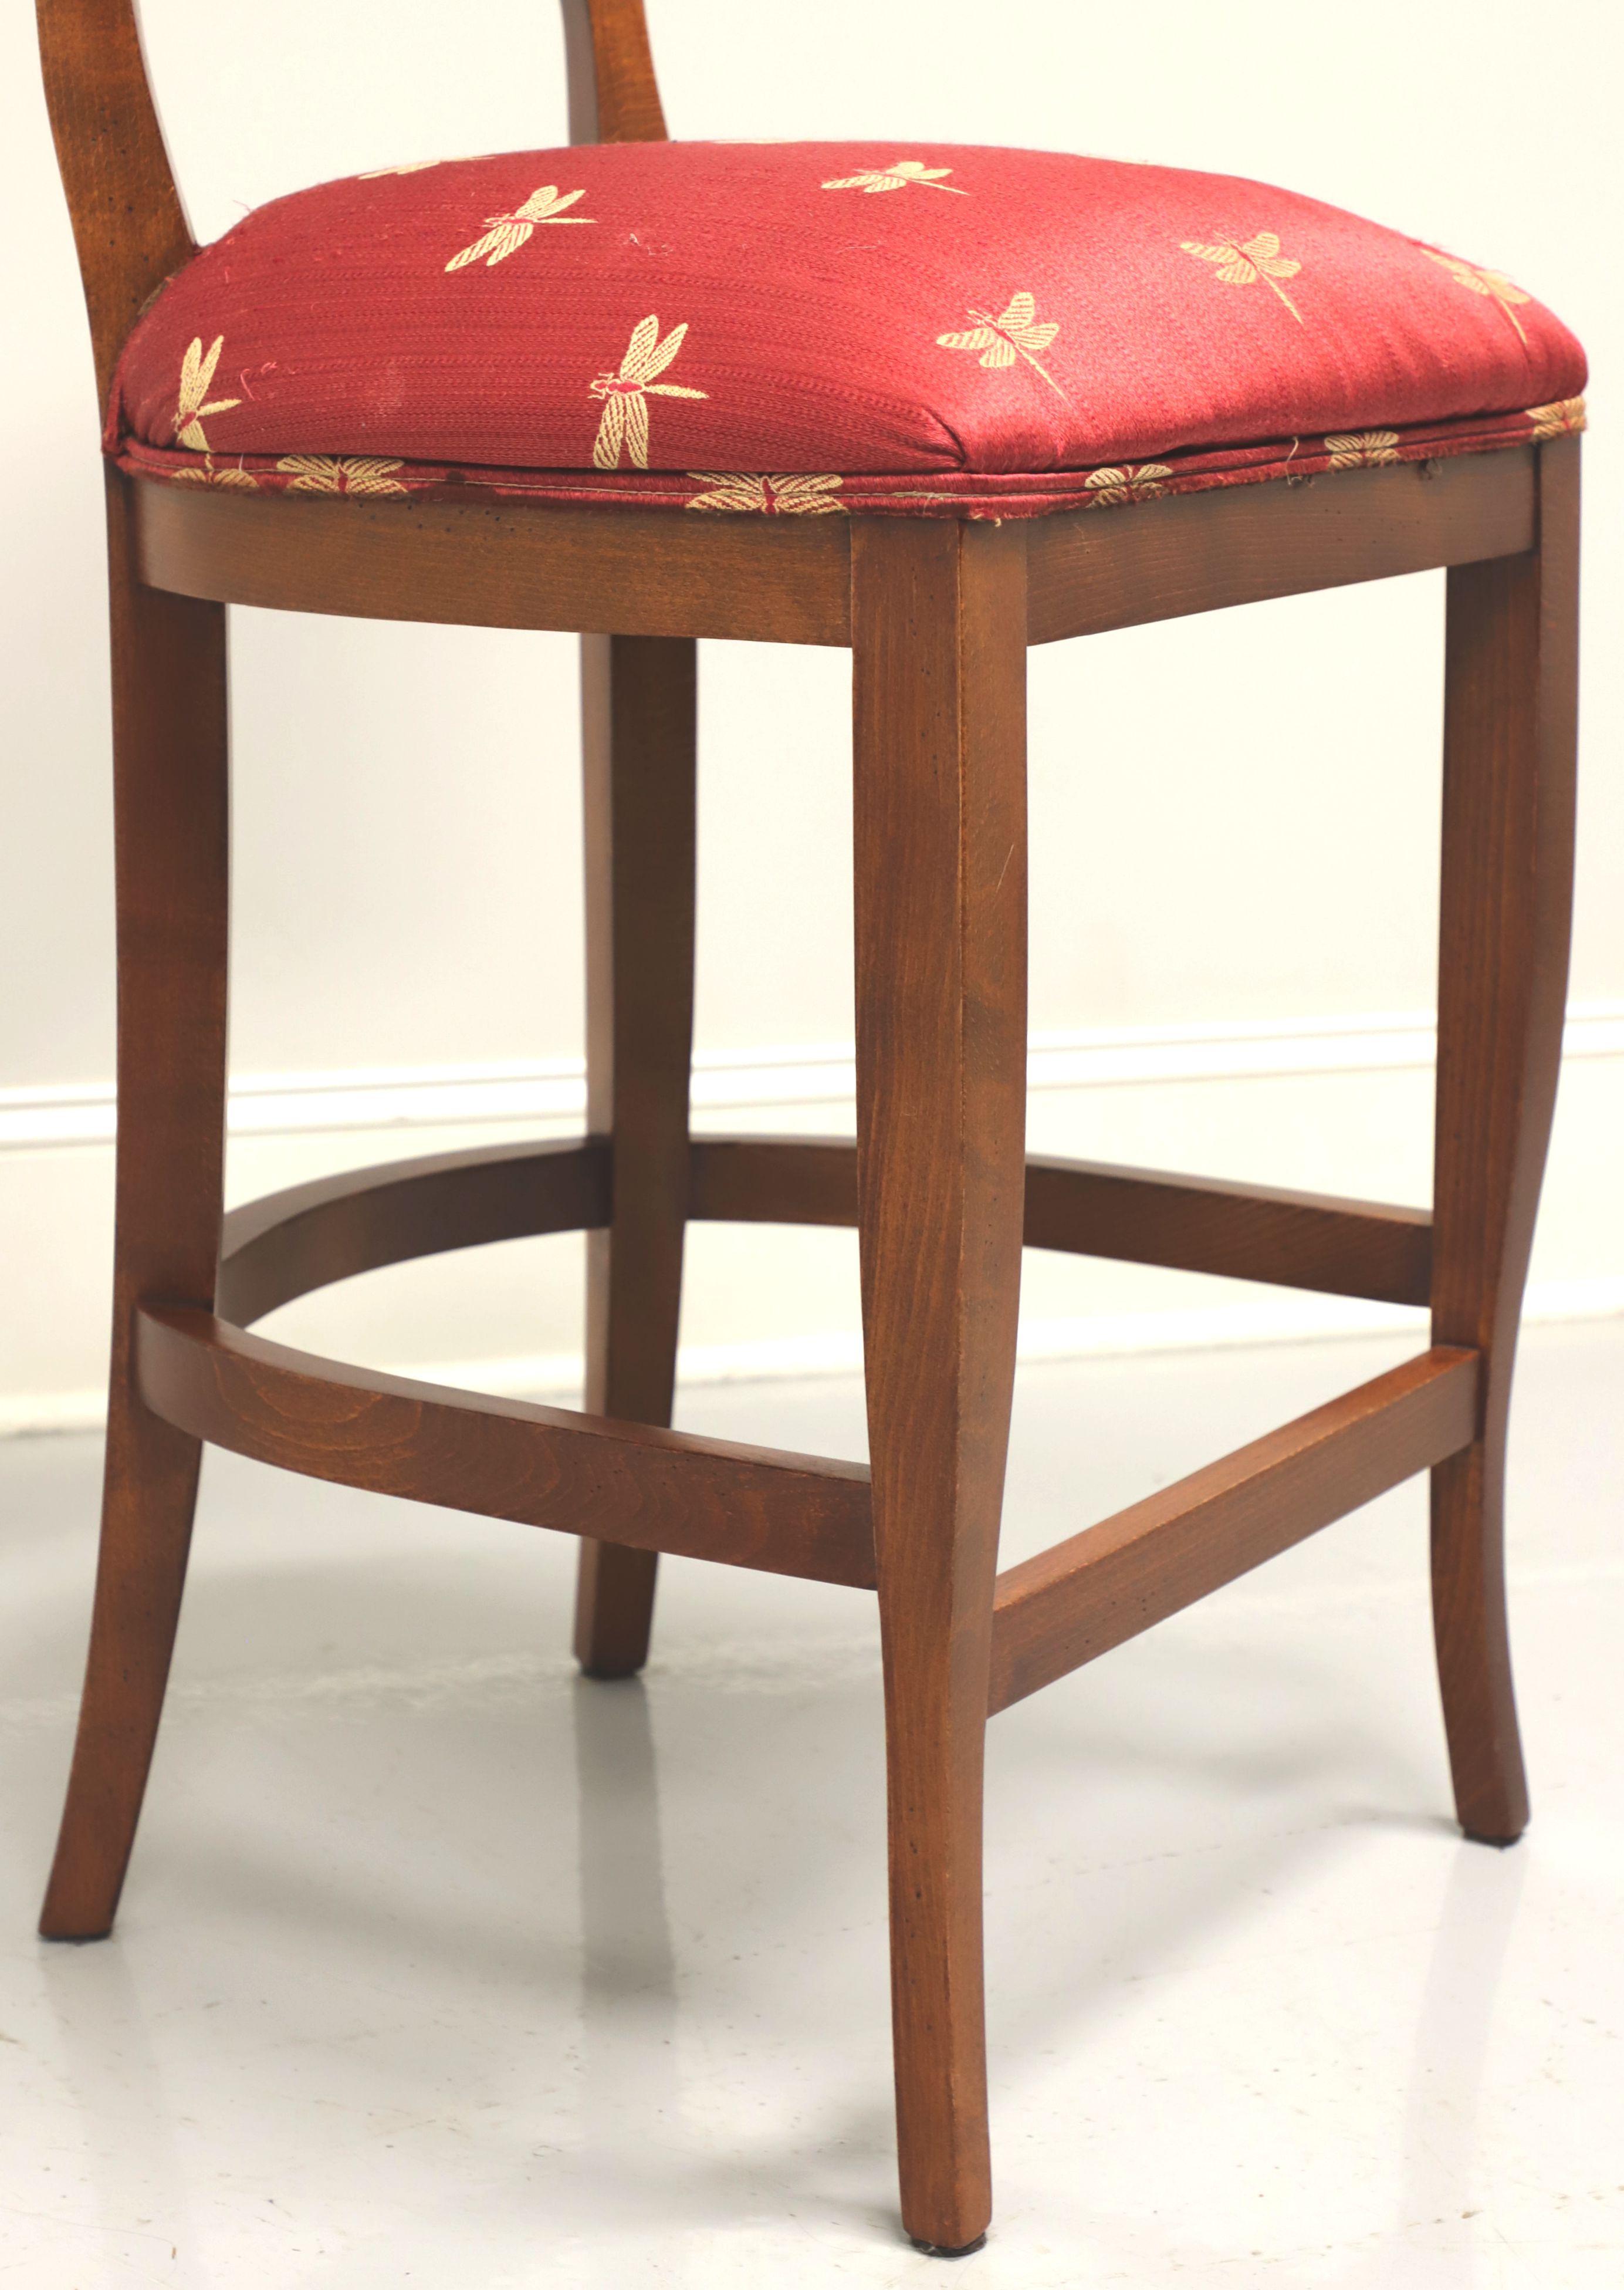 Tiger & Burl Oak Counter Height Stools by EMERSON ET CIE - Pair A 2